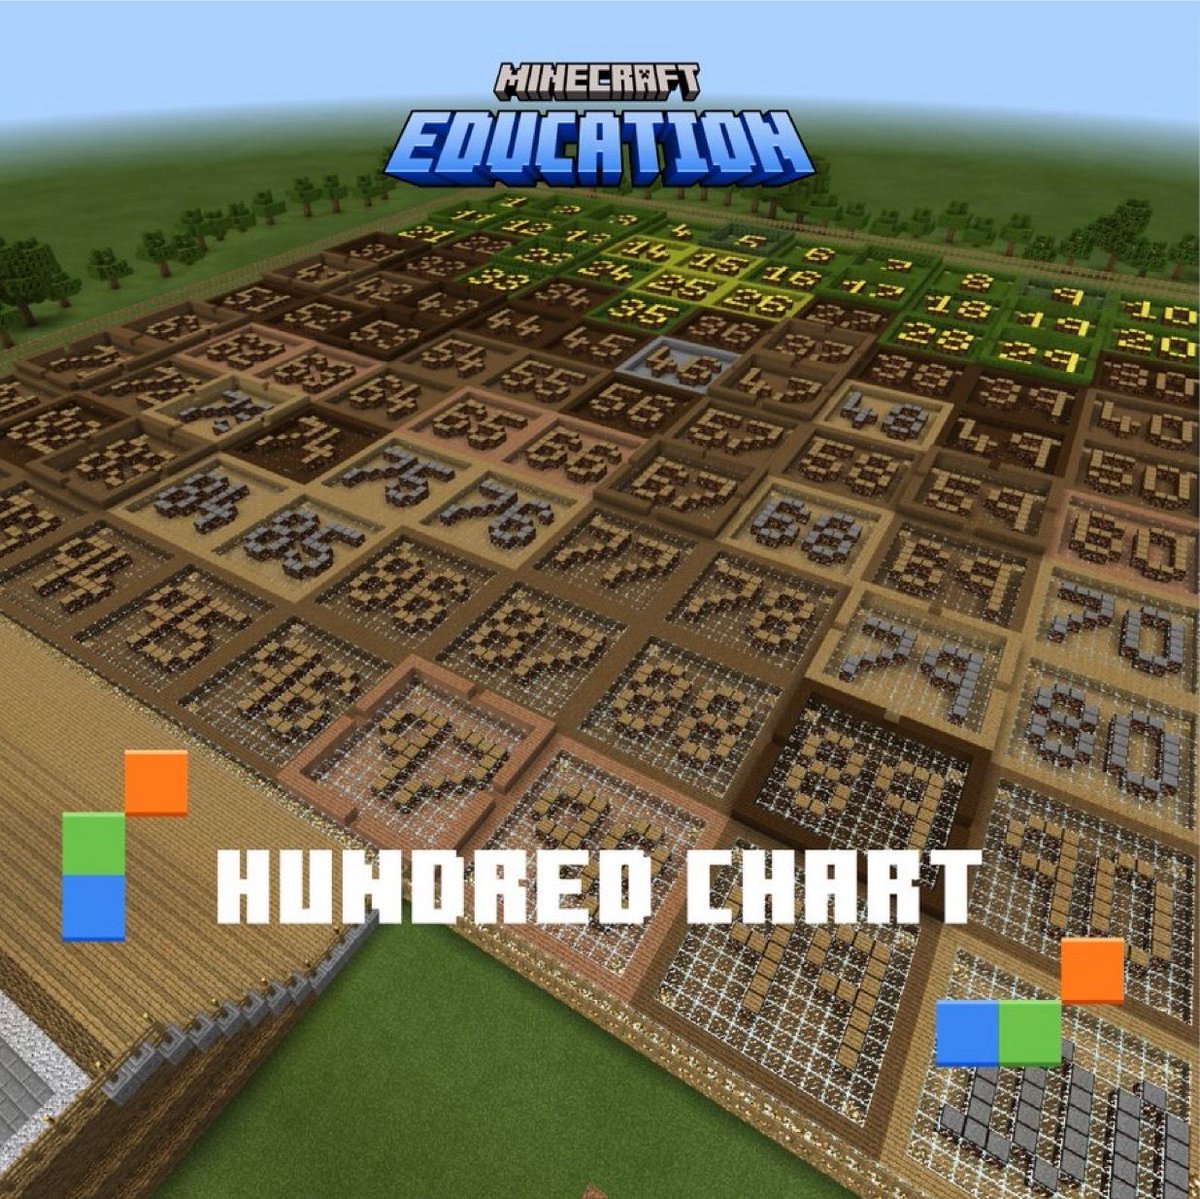 🚀Level up your #numeracy lessons with this ginormous #MinecraftEdu Hundred Chart! 🧮

From counting practice to multiplication to checking work, build this world into your next #Math activity. 📈

Download today at msft.it/6010cUlNG